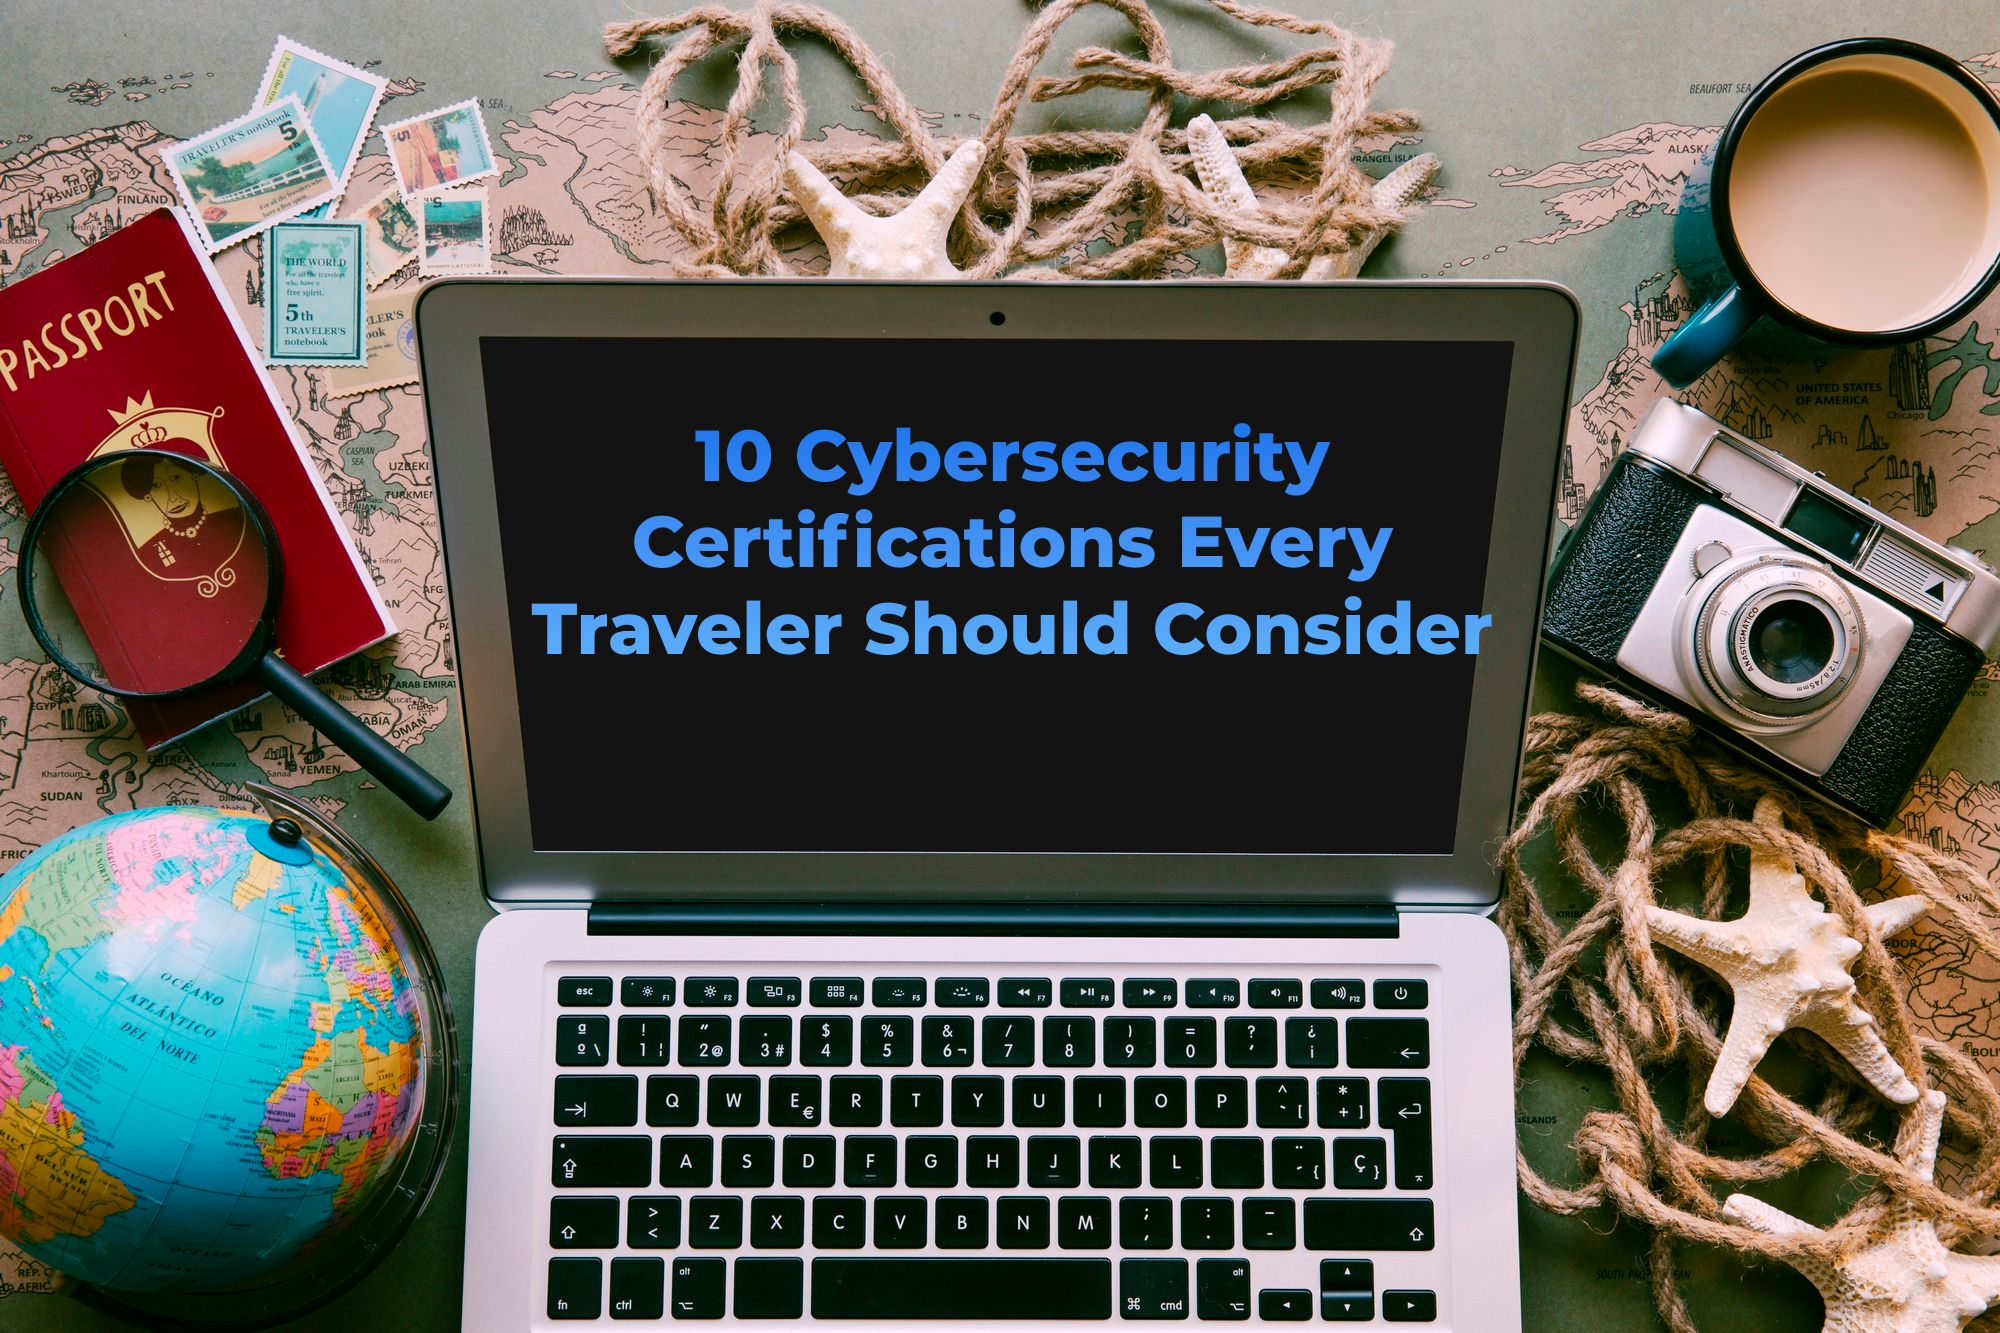 10-cybersecurity-certifications-every-traveler-should-consider-travellersofindia.com